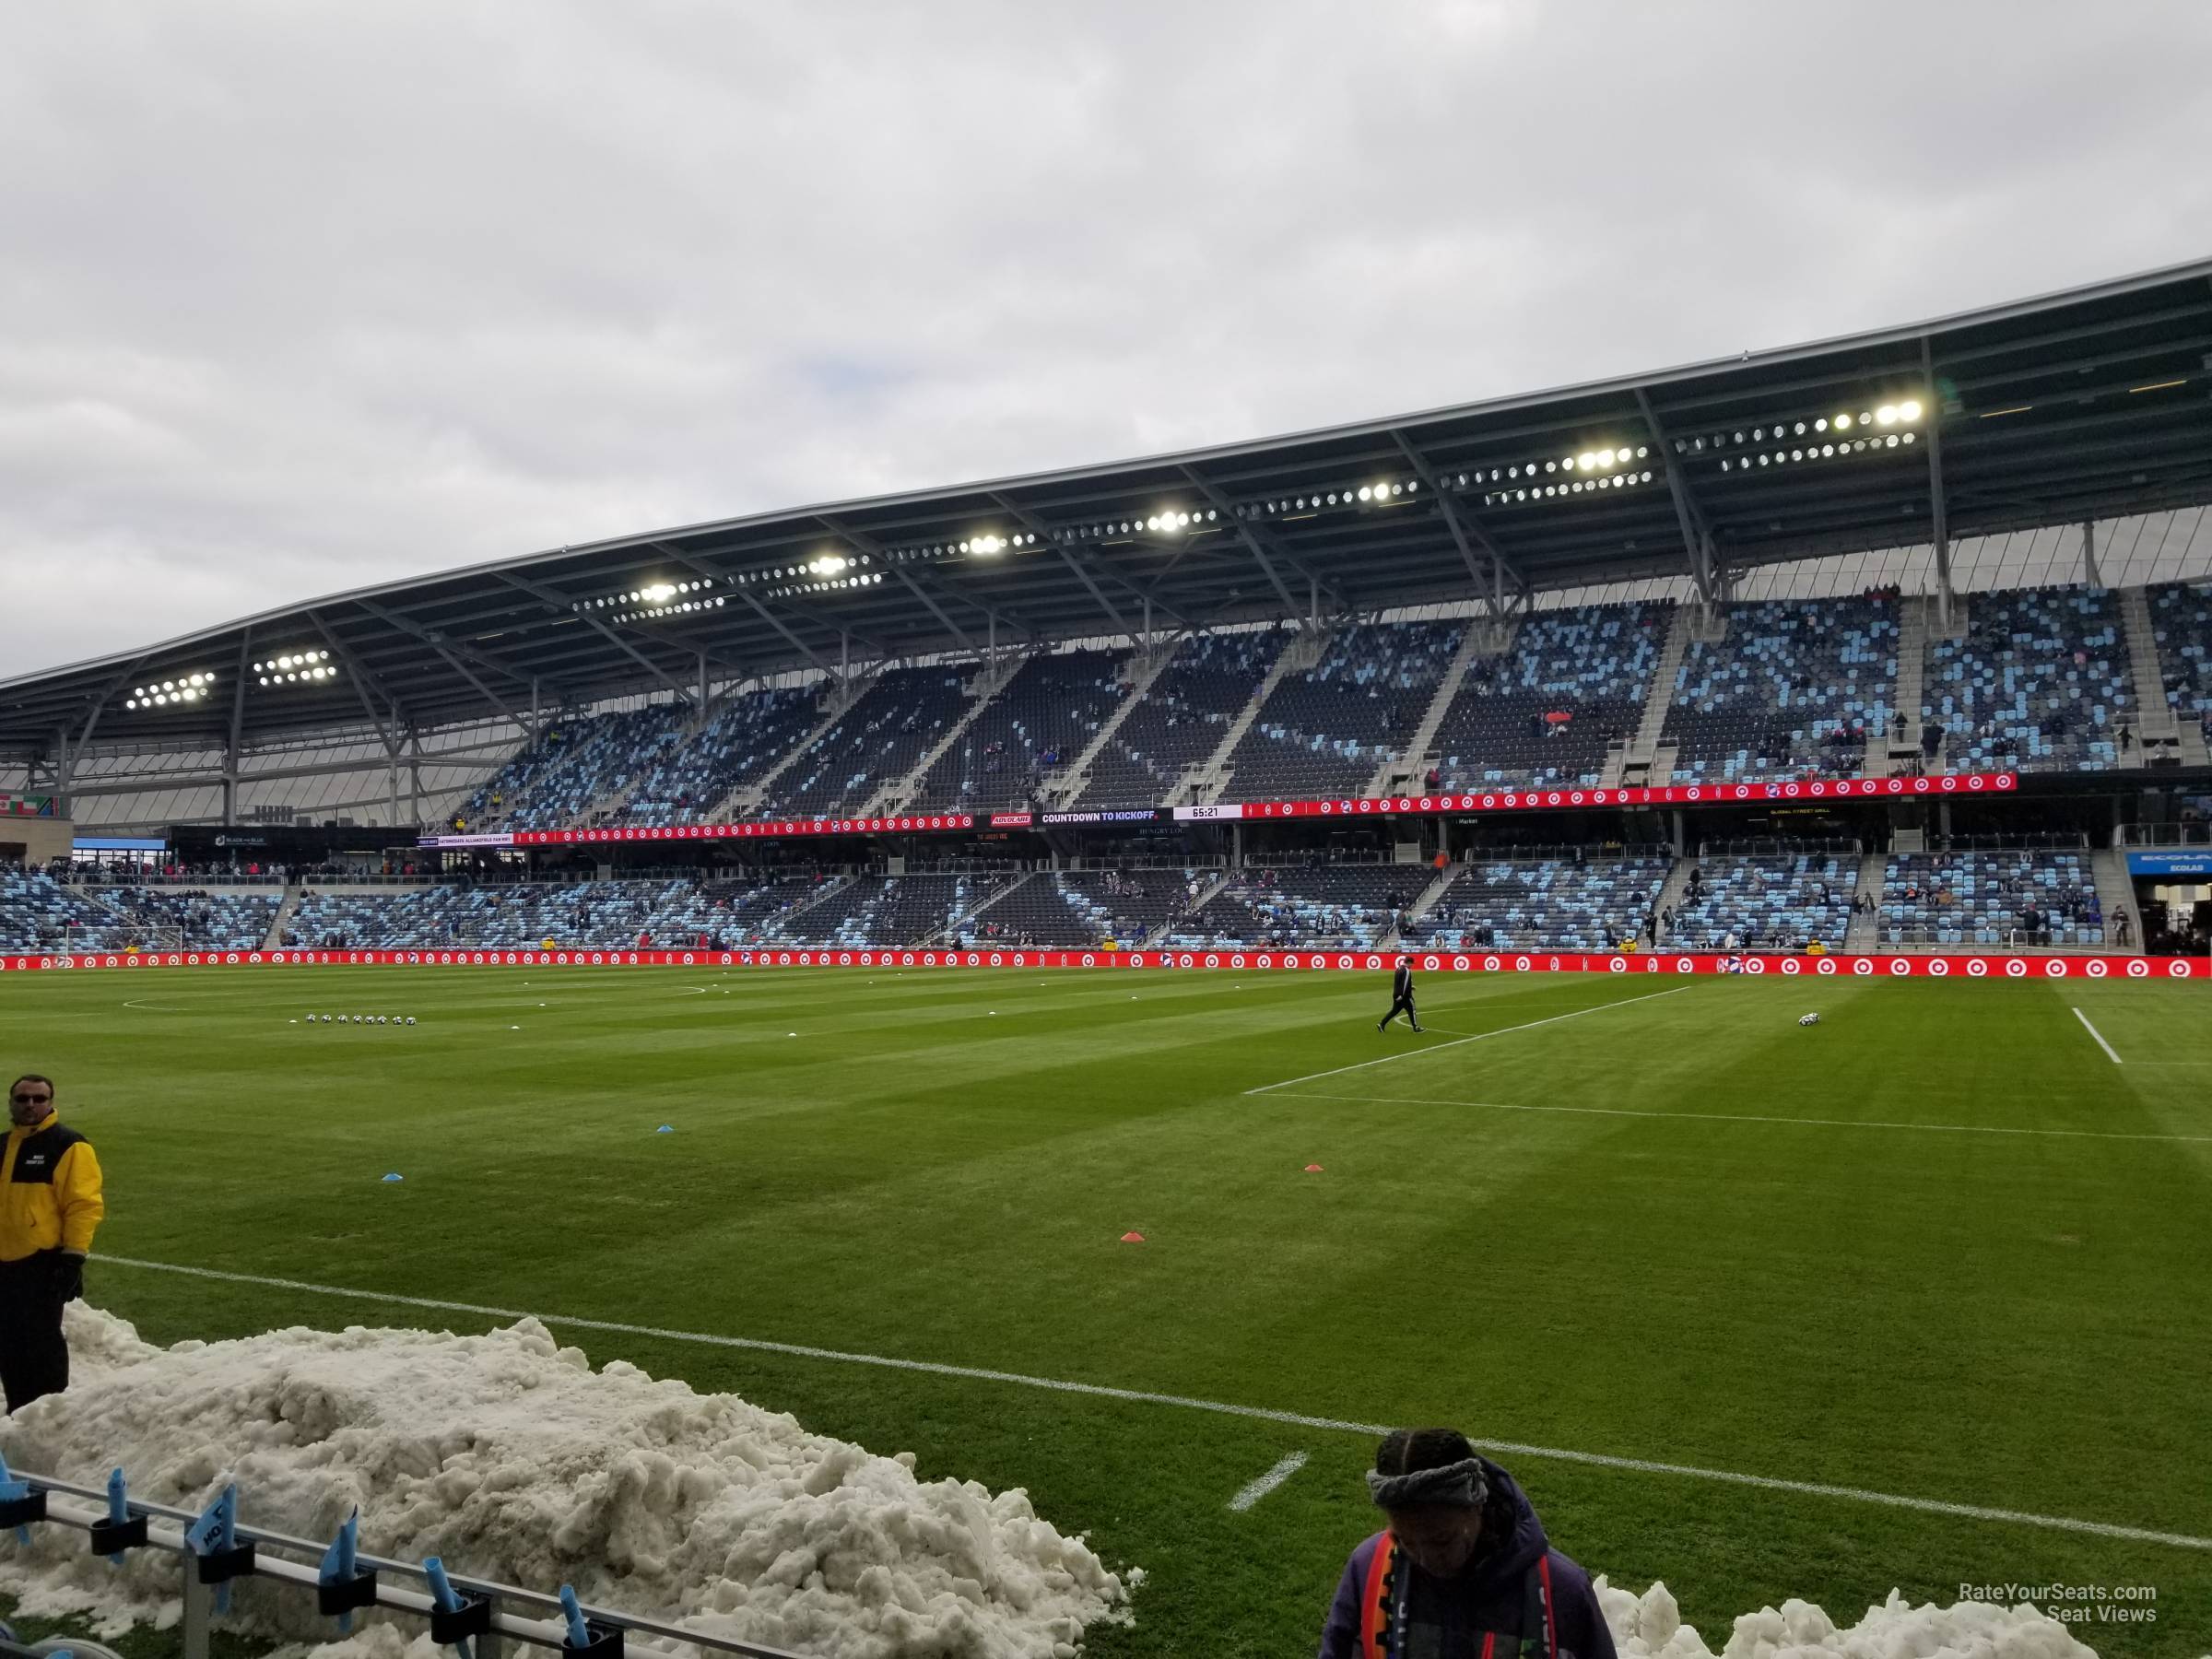 section 28, row 5 seat view  - allianz field